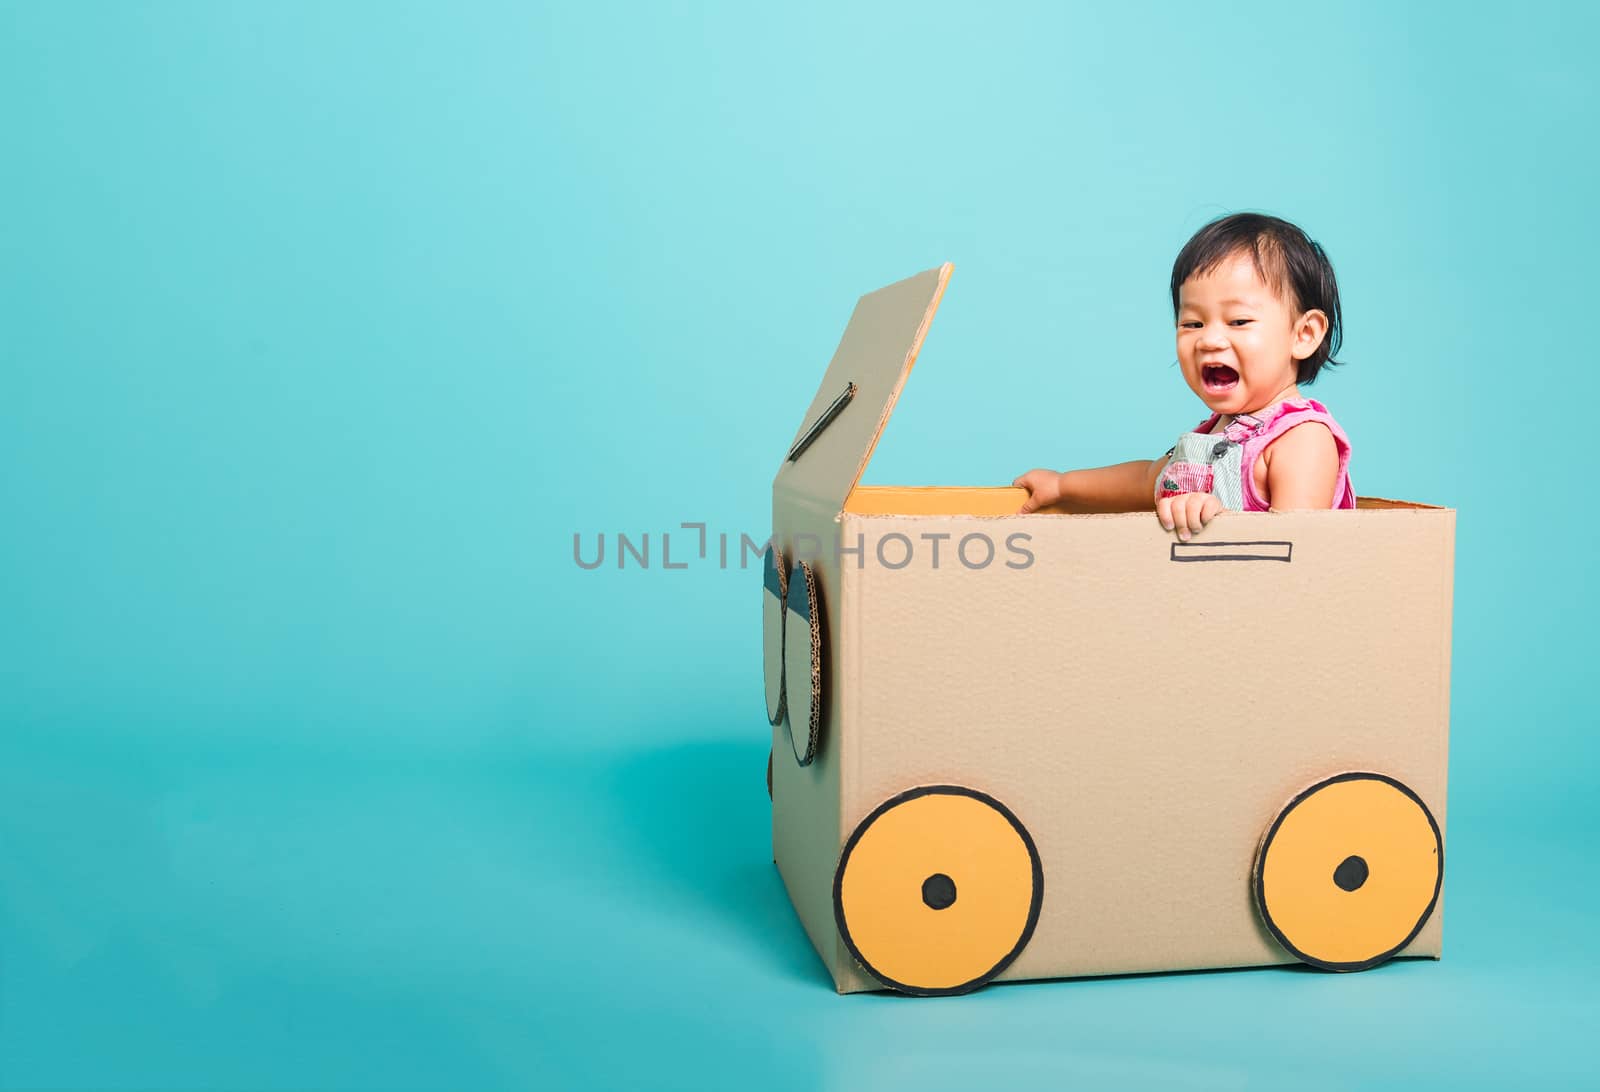 Happy Asian Baby girl smile in driving play car creative by a cardboard box imagination, summer holiday travel concept, studio shot on blue background with copy space for text